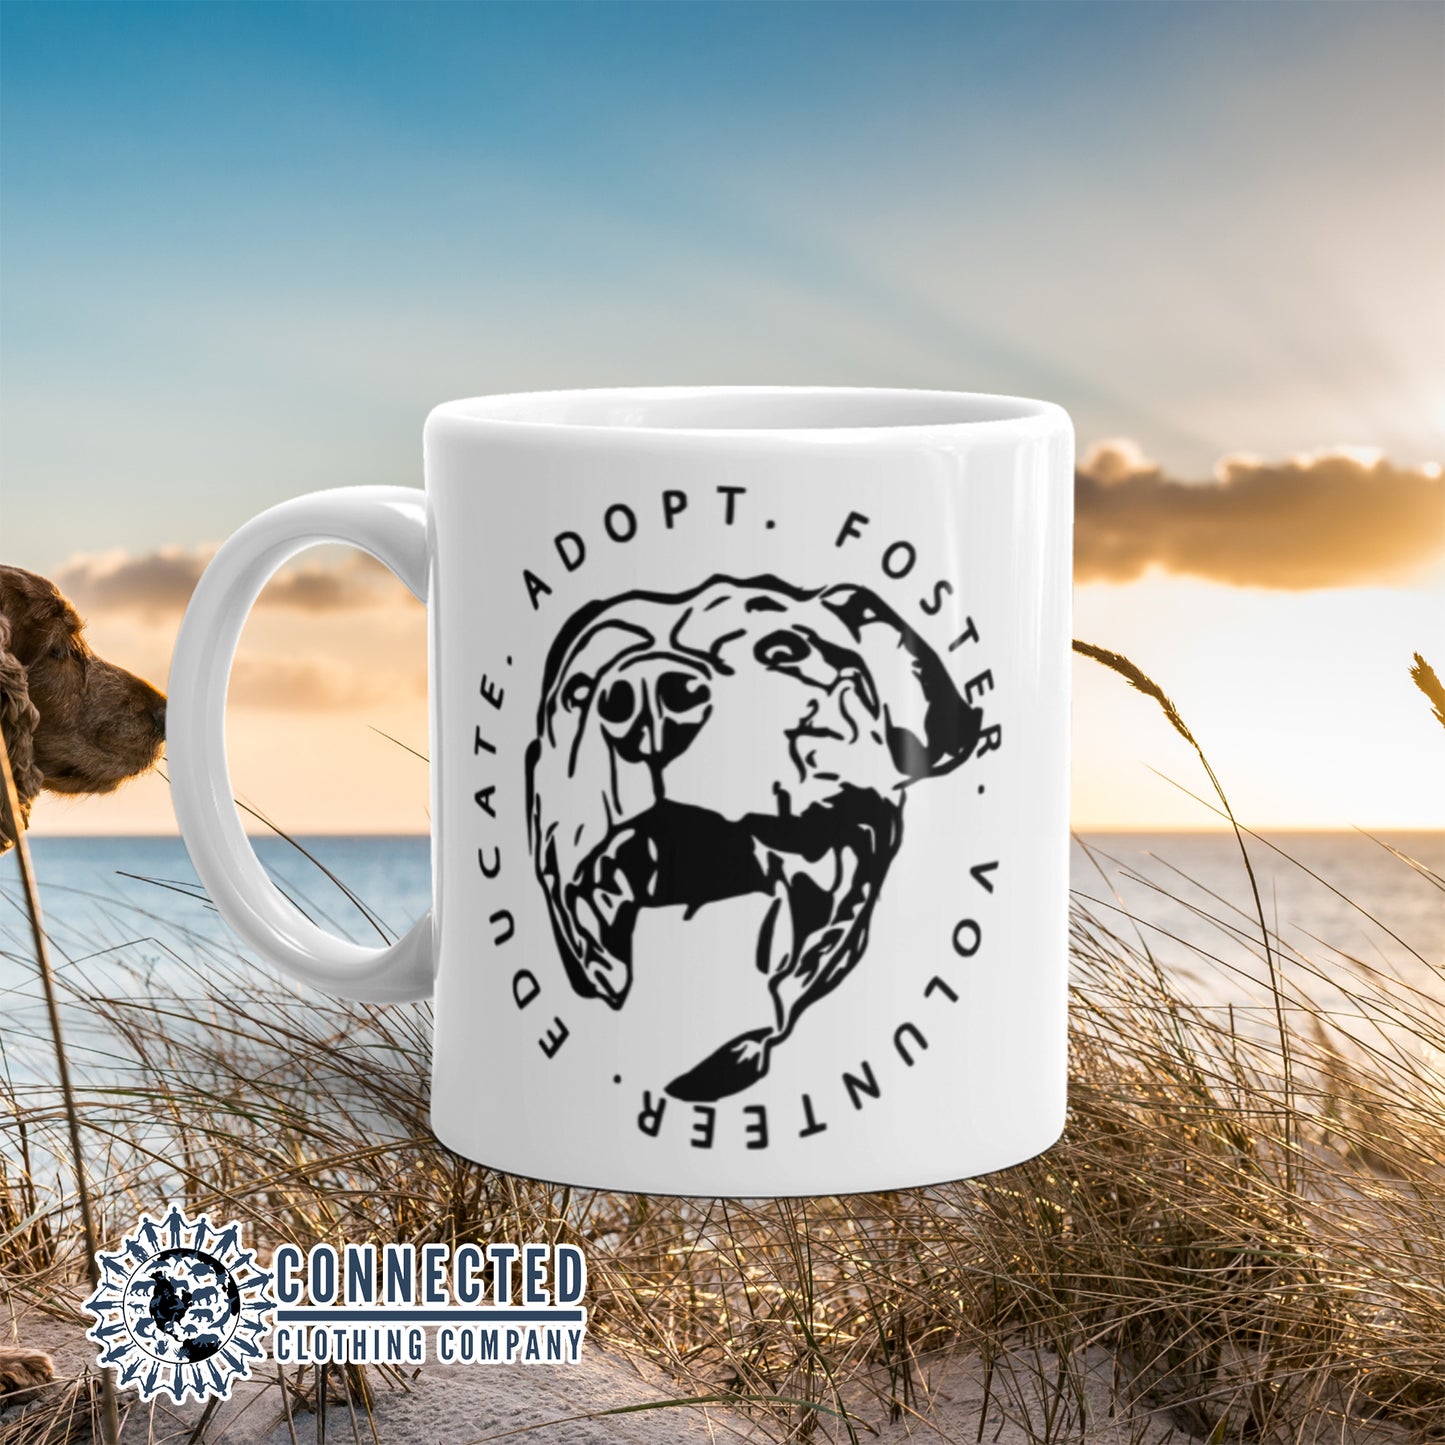 Adopt Educate Foster Volunteer Classic Mug - Connected Clothing Company - Ethically and Sustainably Made - 10% of profits donated to animal rescue organizations